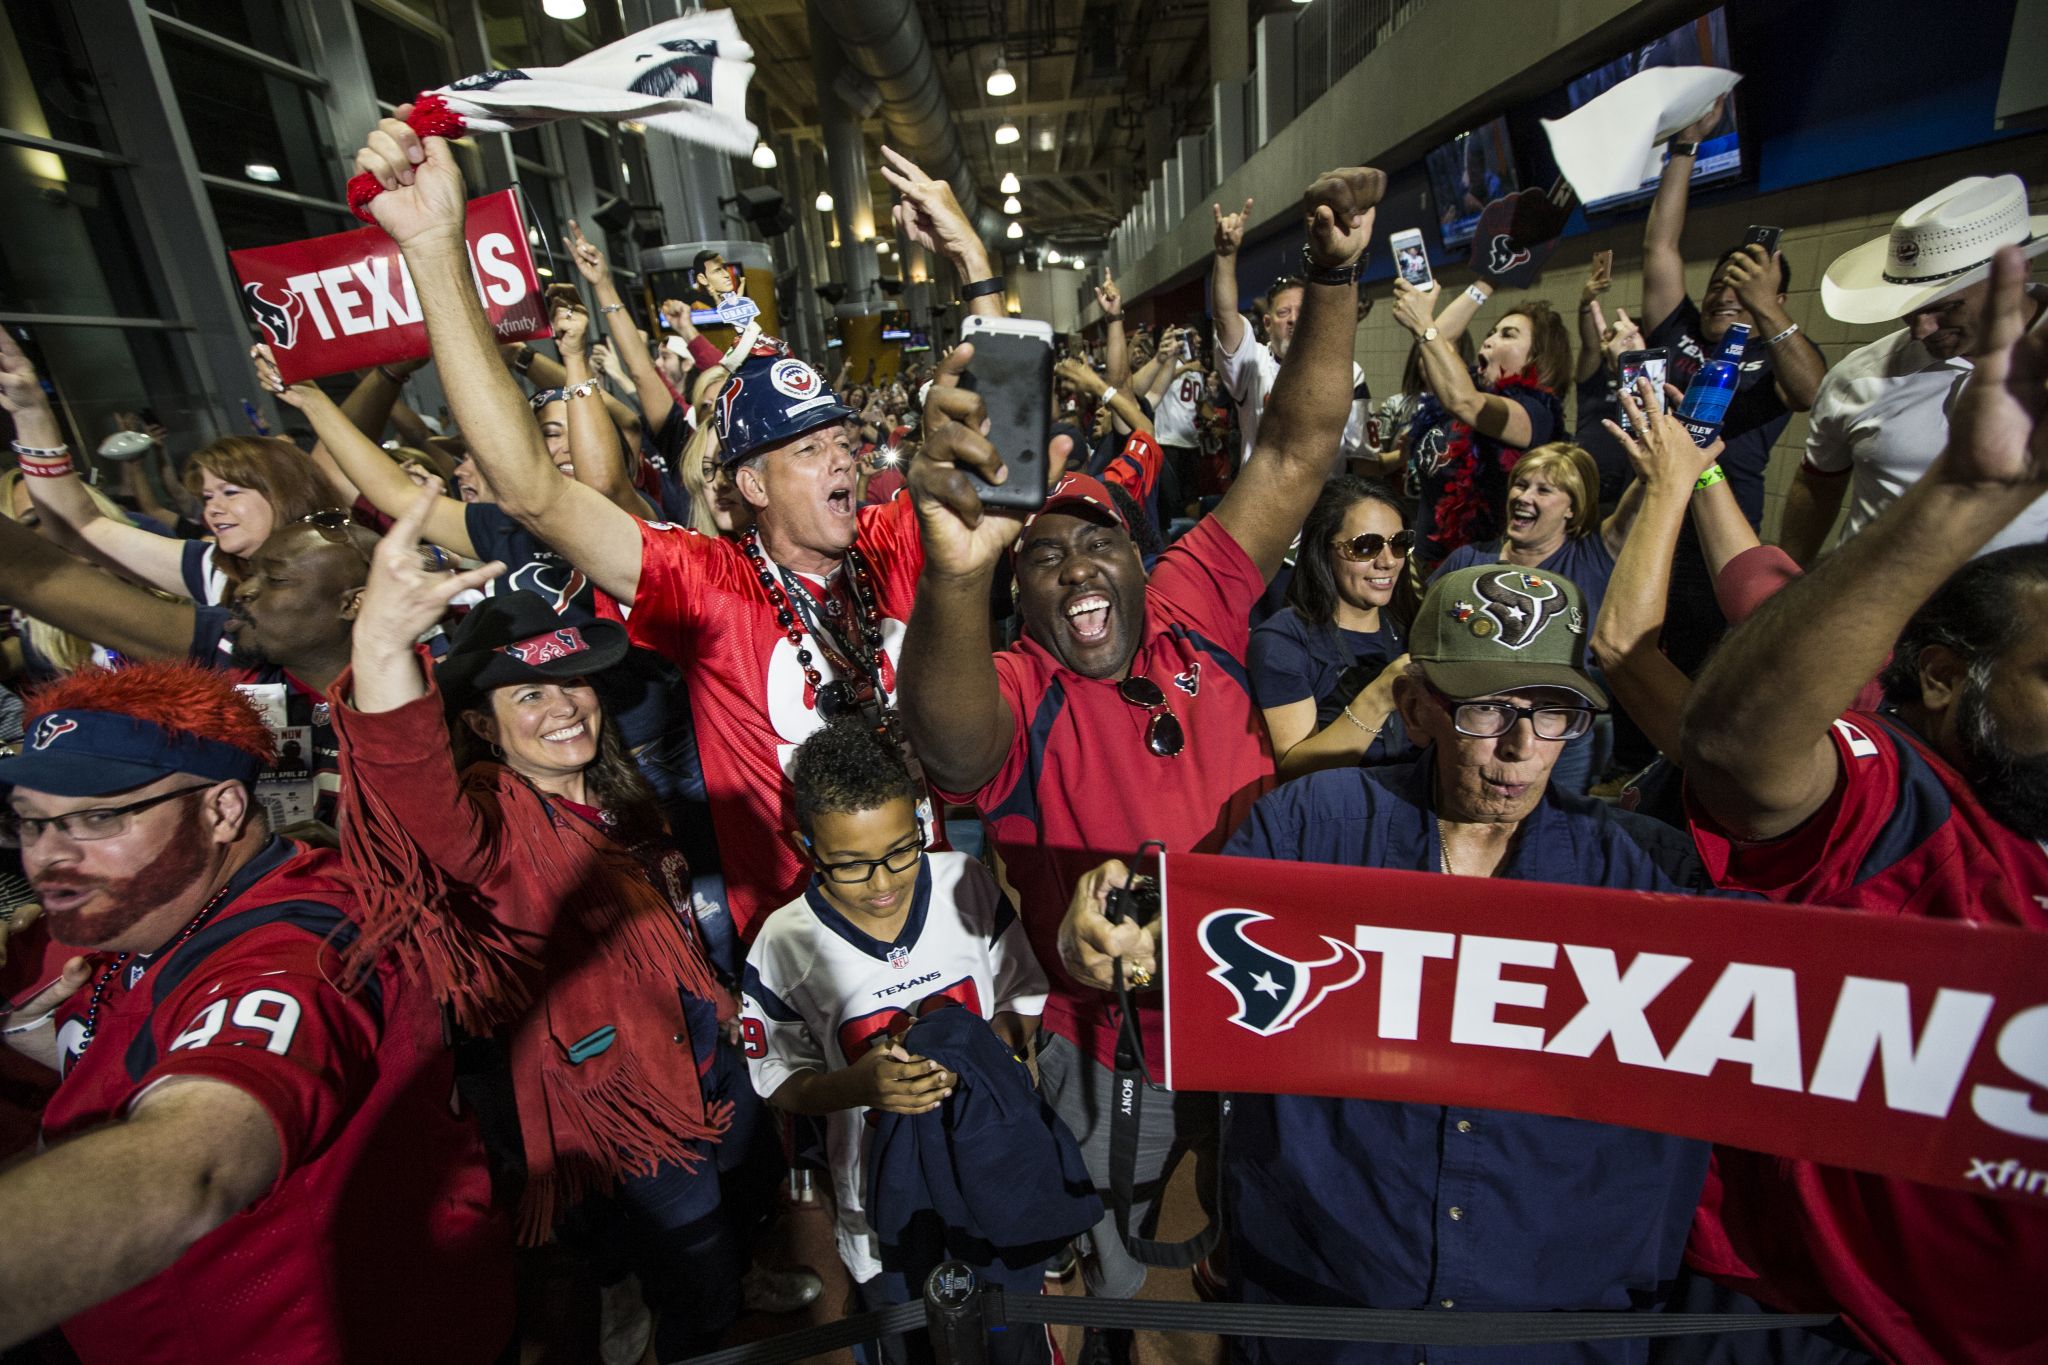 Where the Texans stand on draft picks